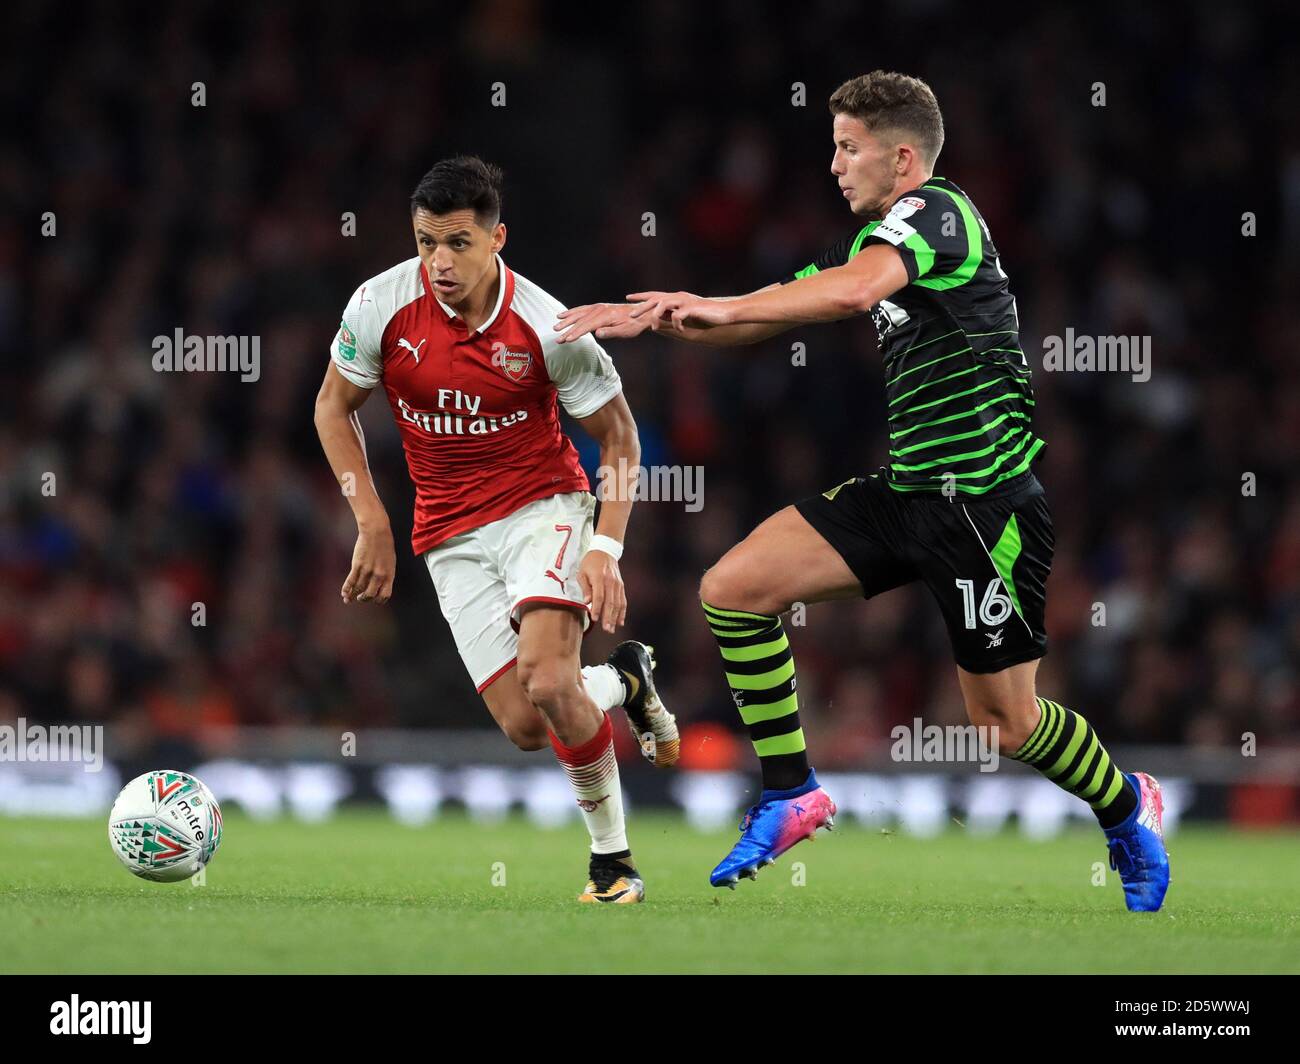 Arsenal's Alexis Sanchez gets away from Doncaster Rovers' Jordan Houghton  Stock Photo - Alamy